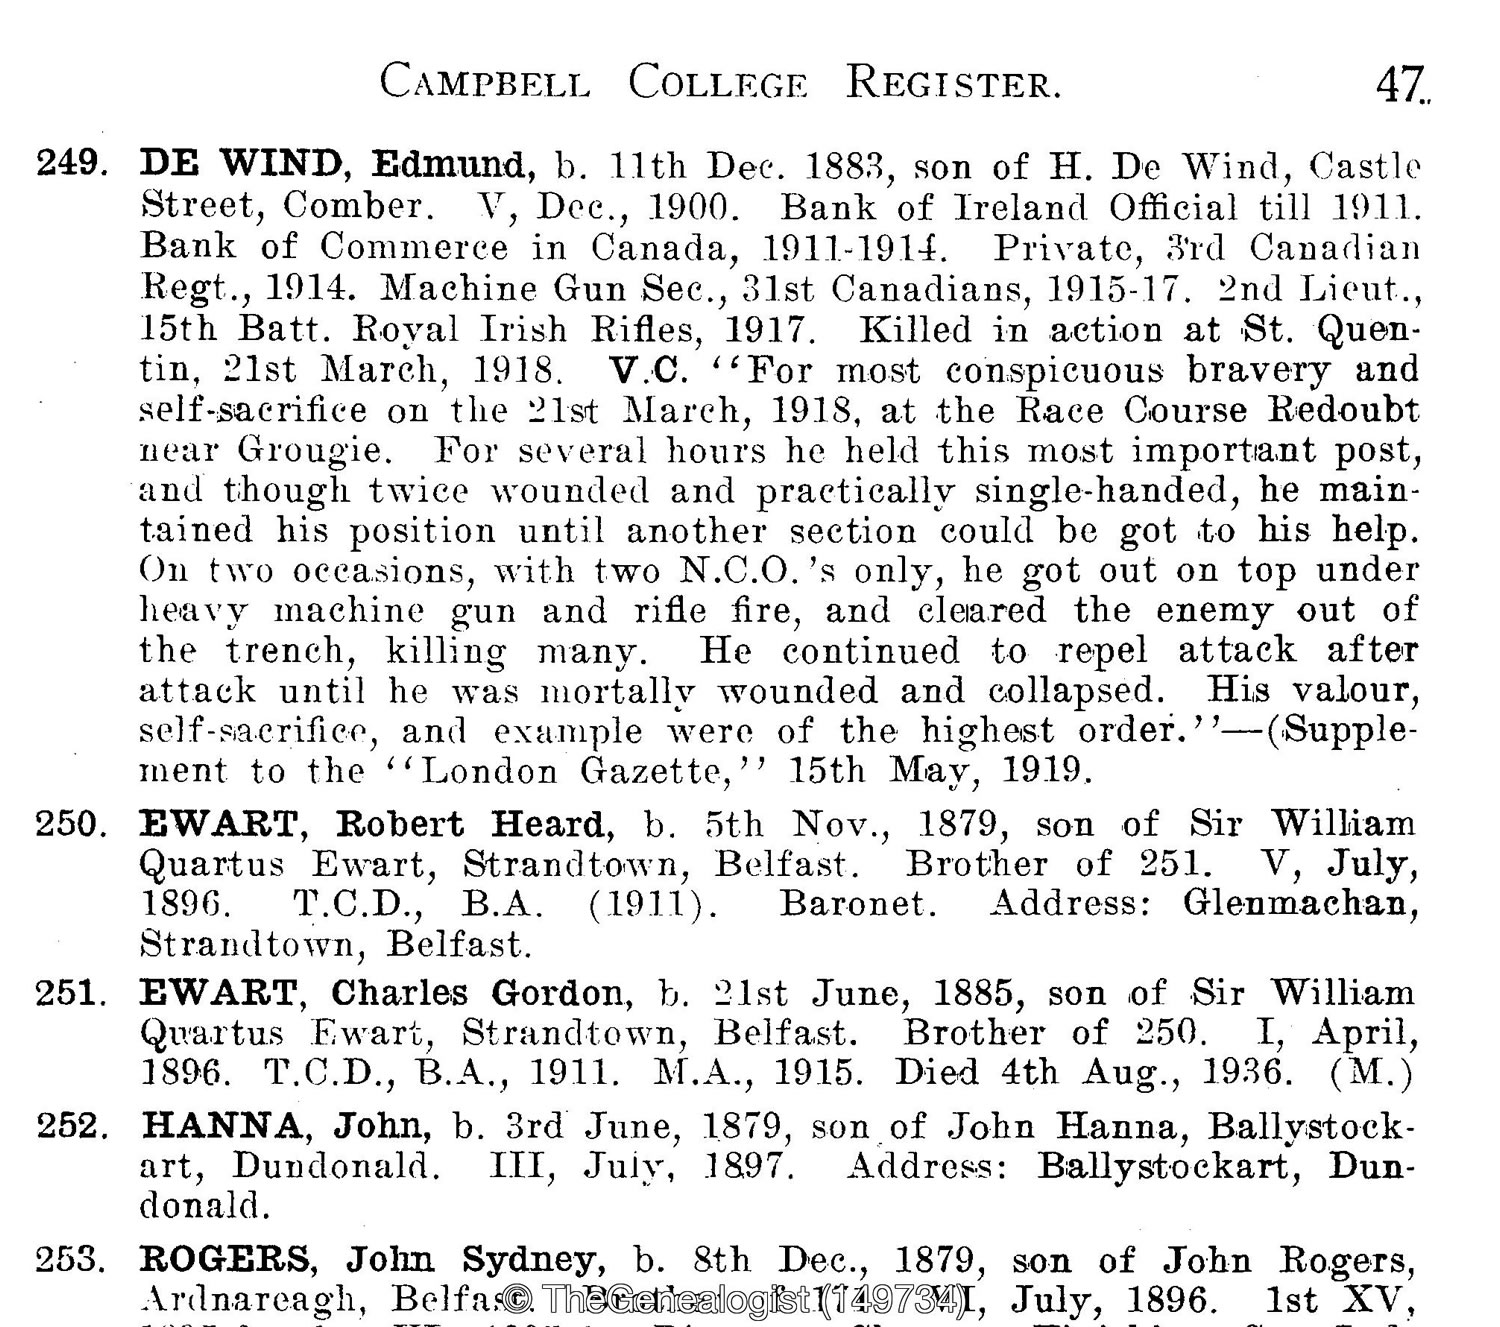 Campbell College Register from the Educational Records on TheGenealogist